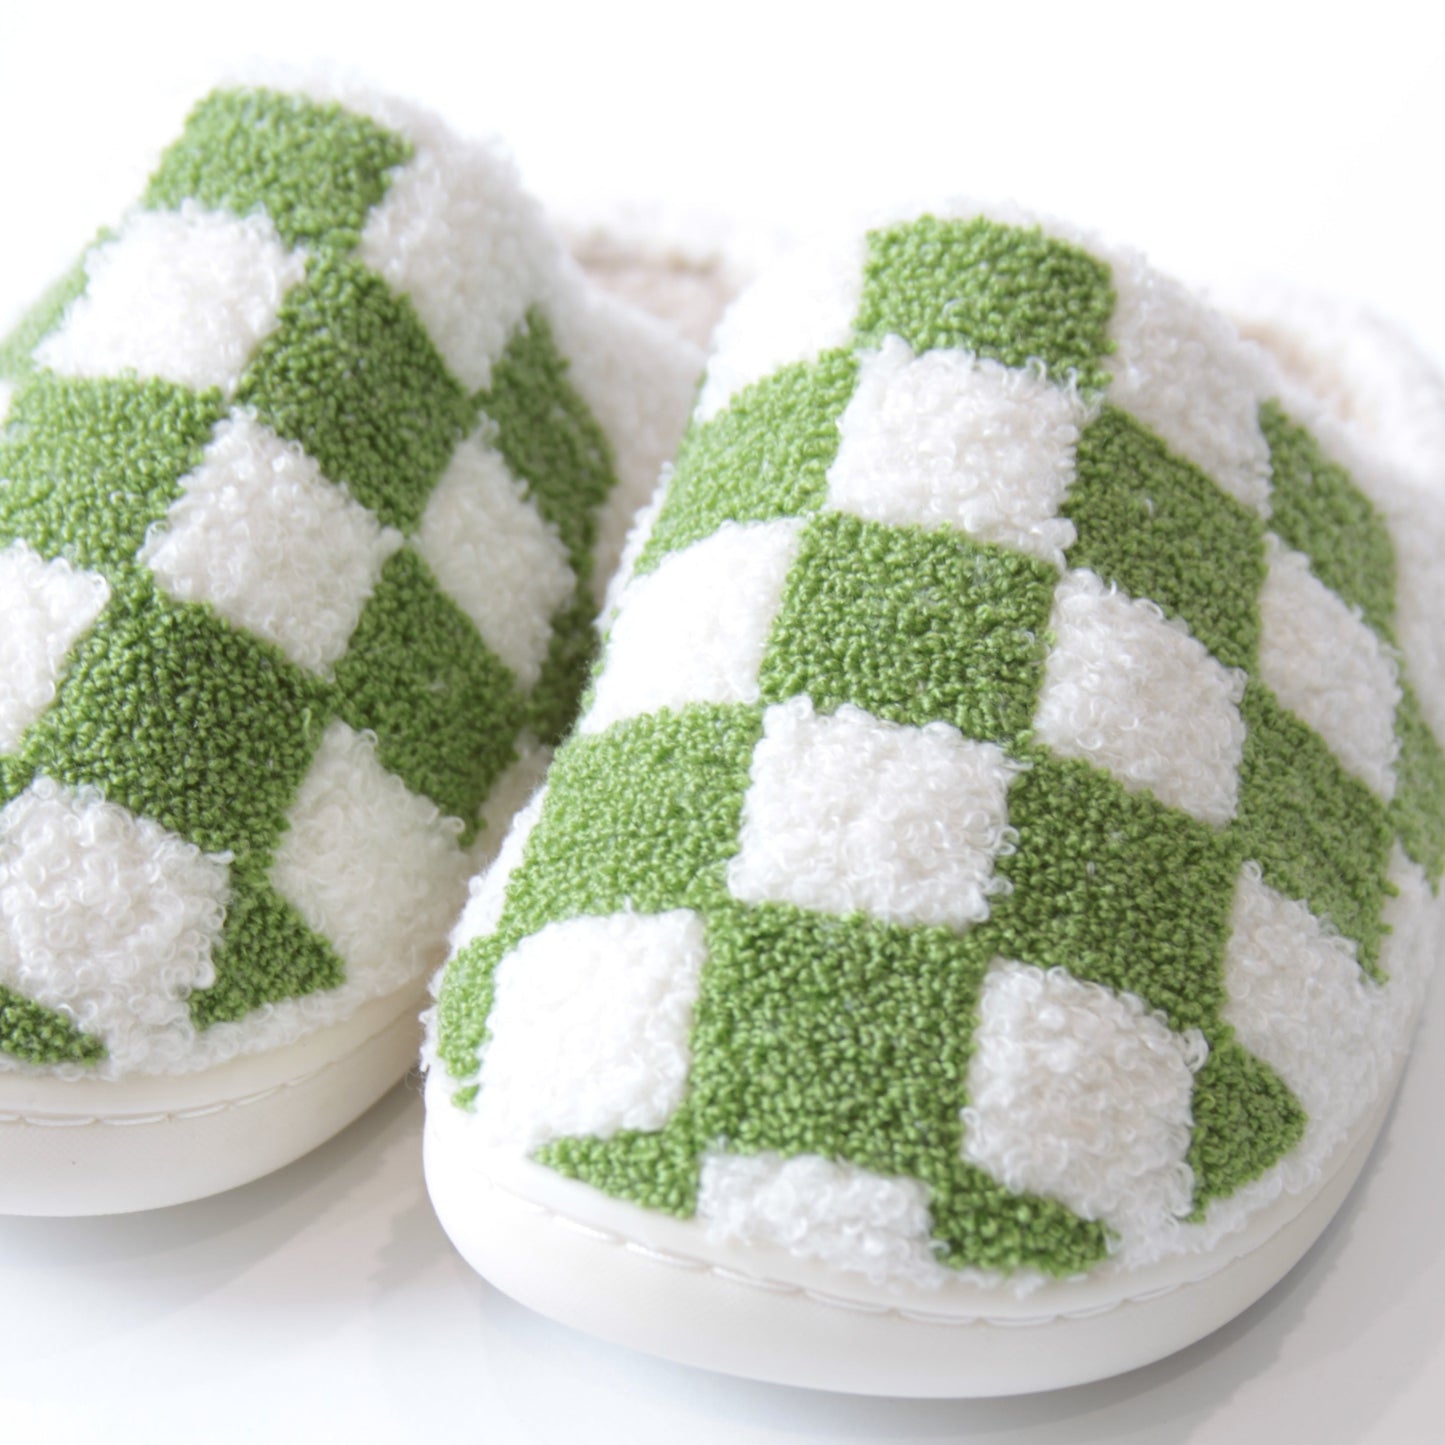 Green Checkered Slippers